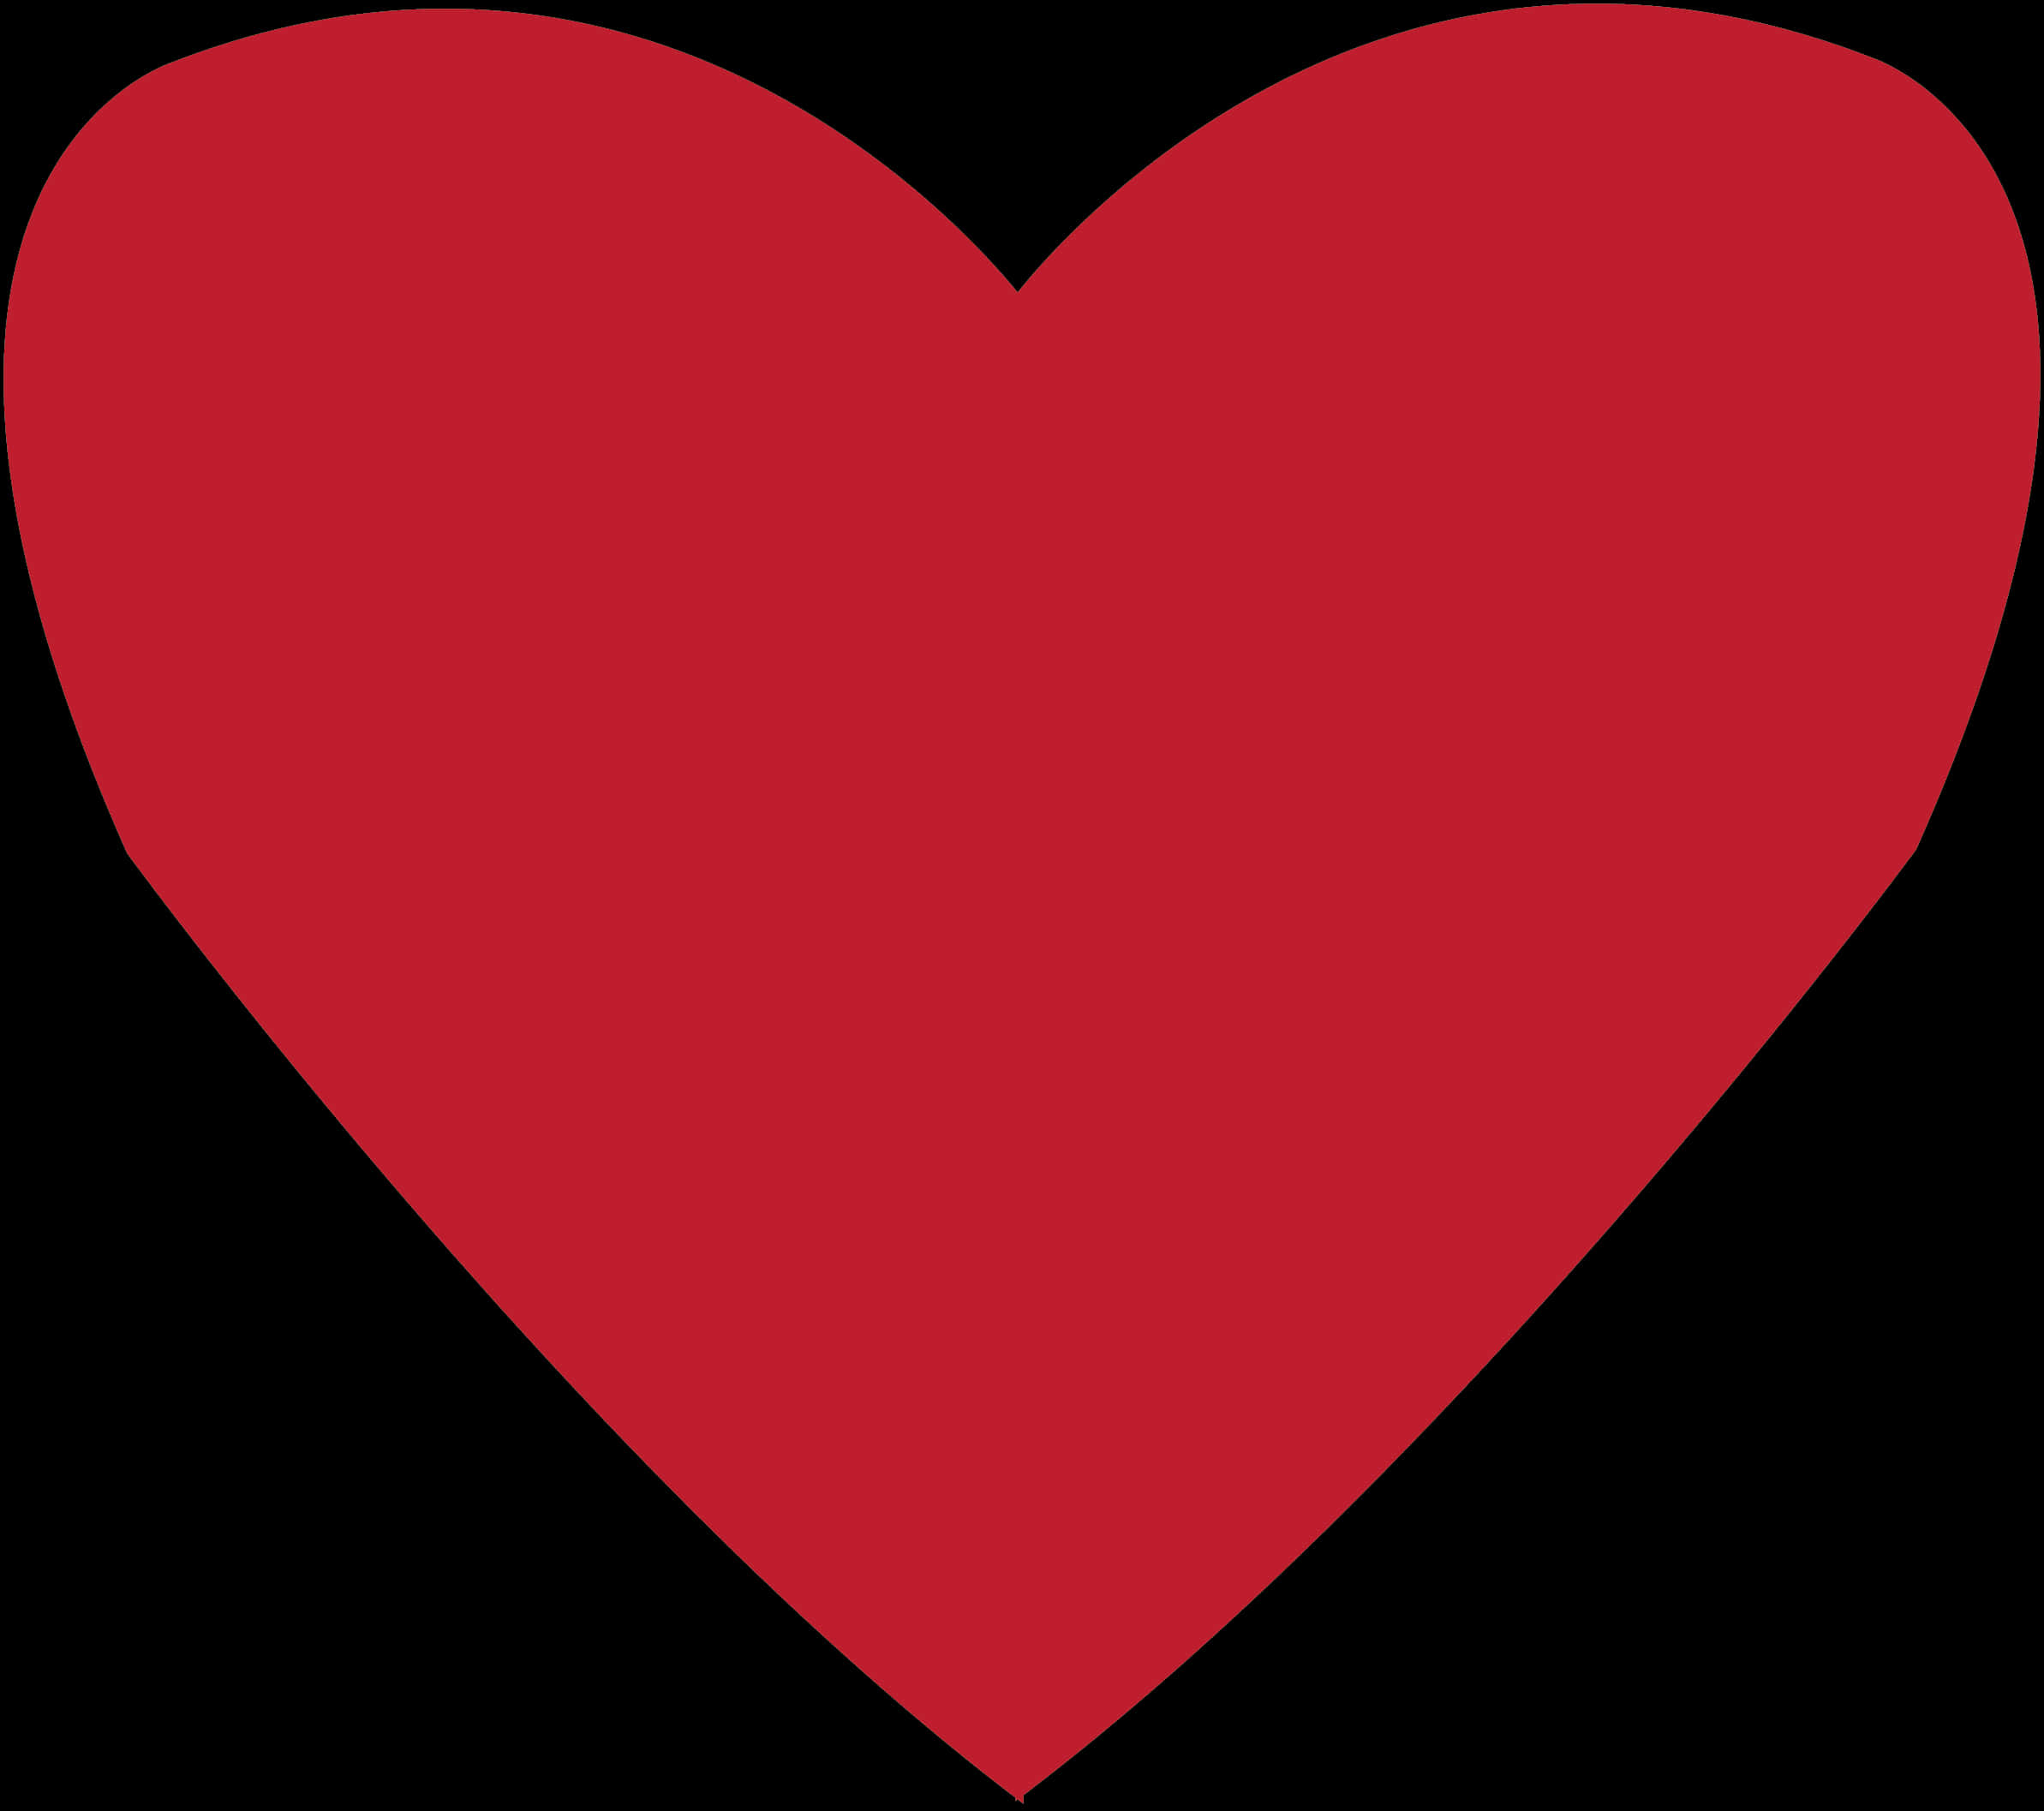 Red Heart Symbol Simple Graphic PNG